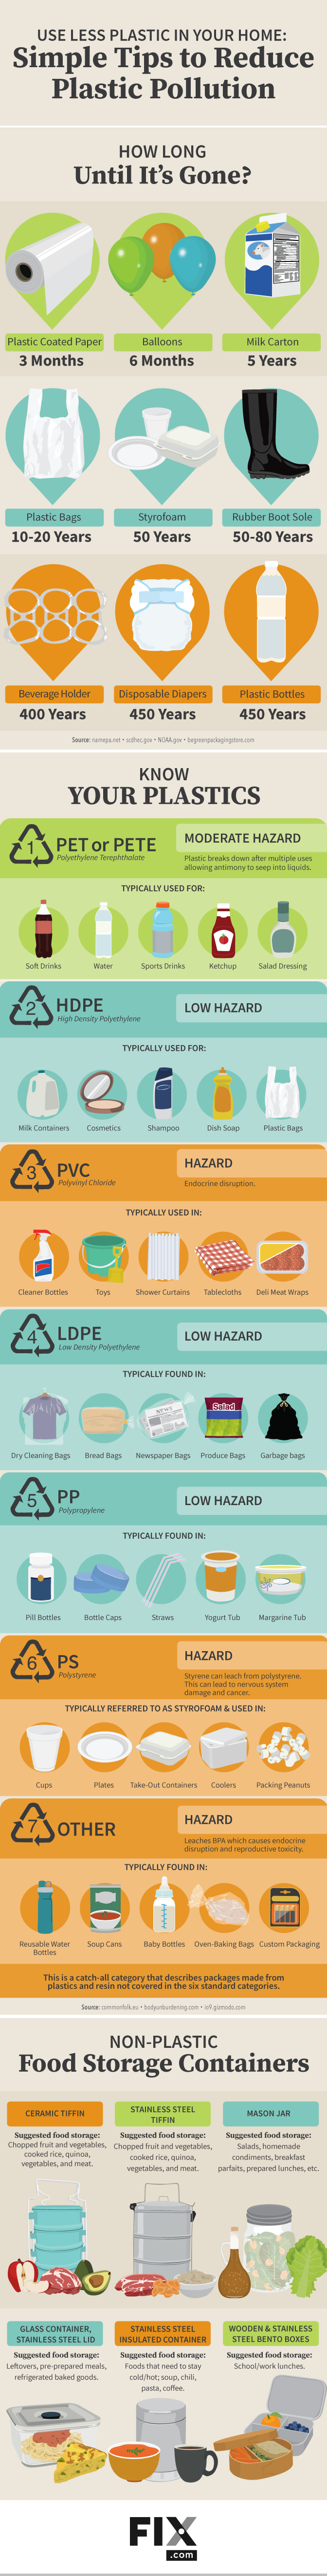 Use Less Plastic in Your Home [Infographic] | ecogreenlove